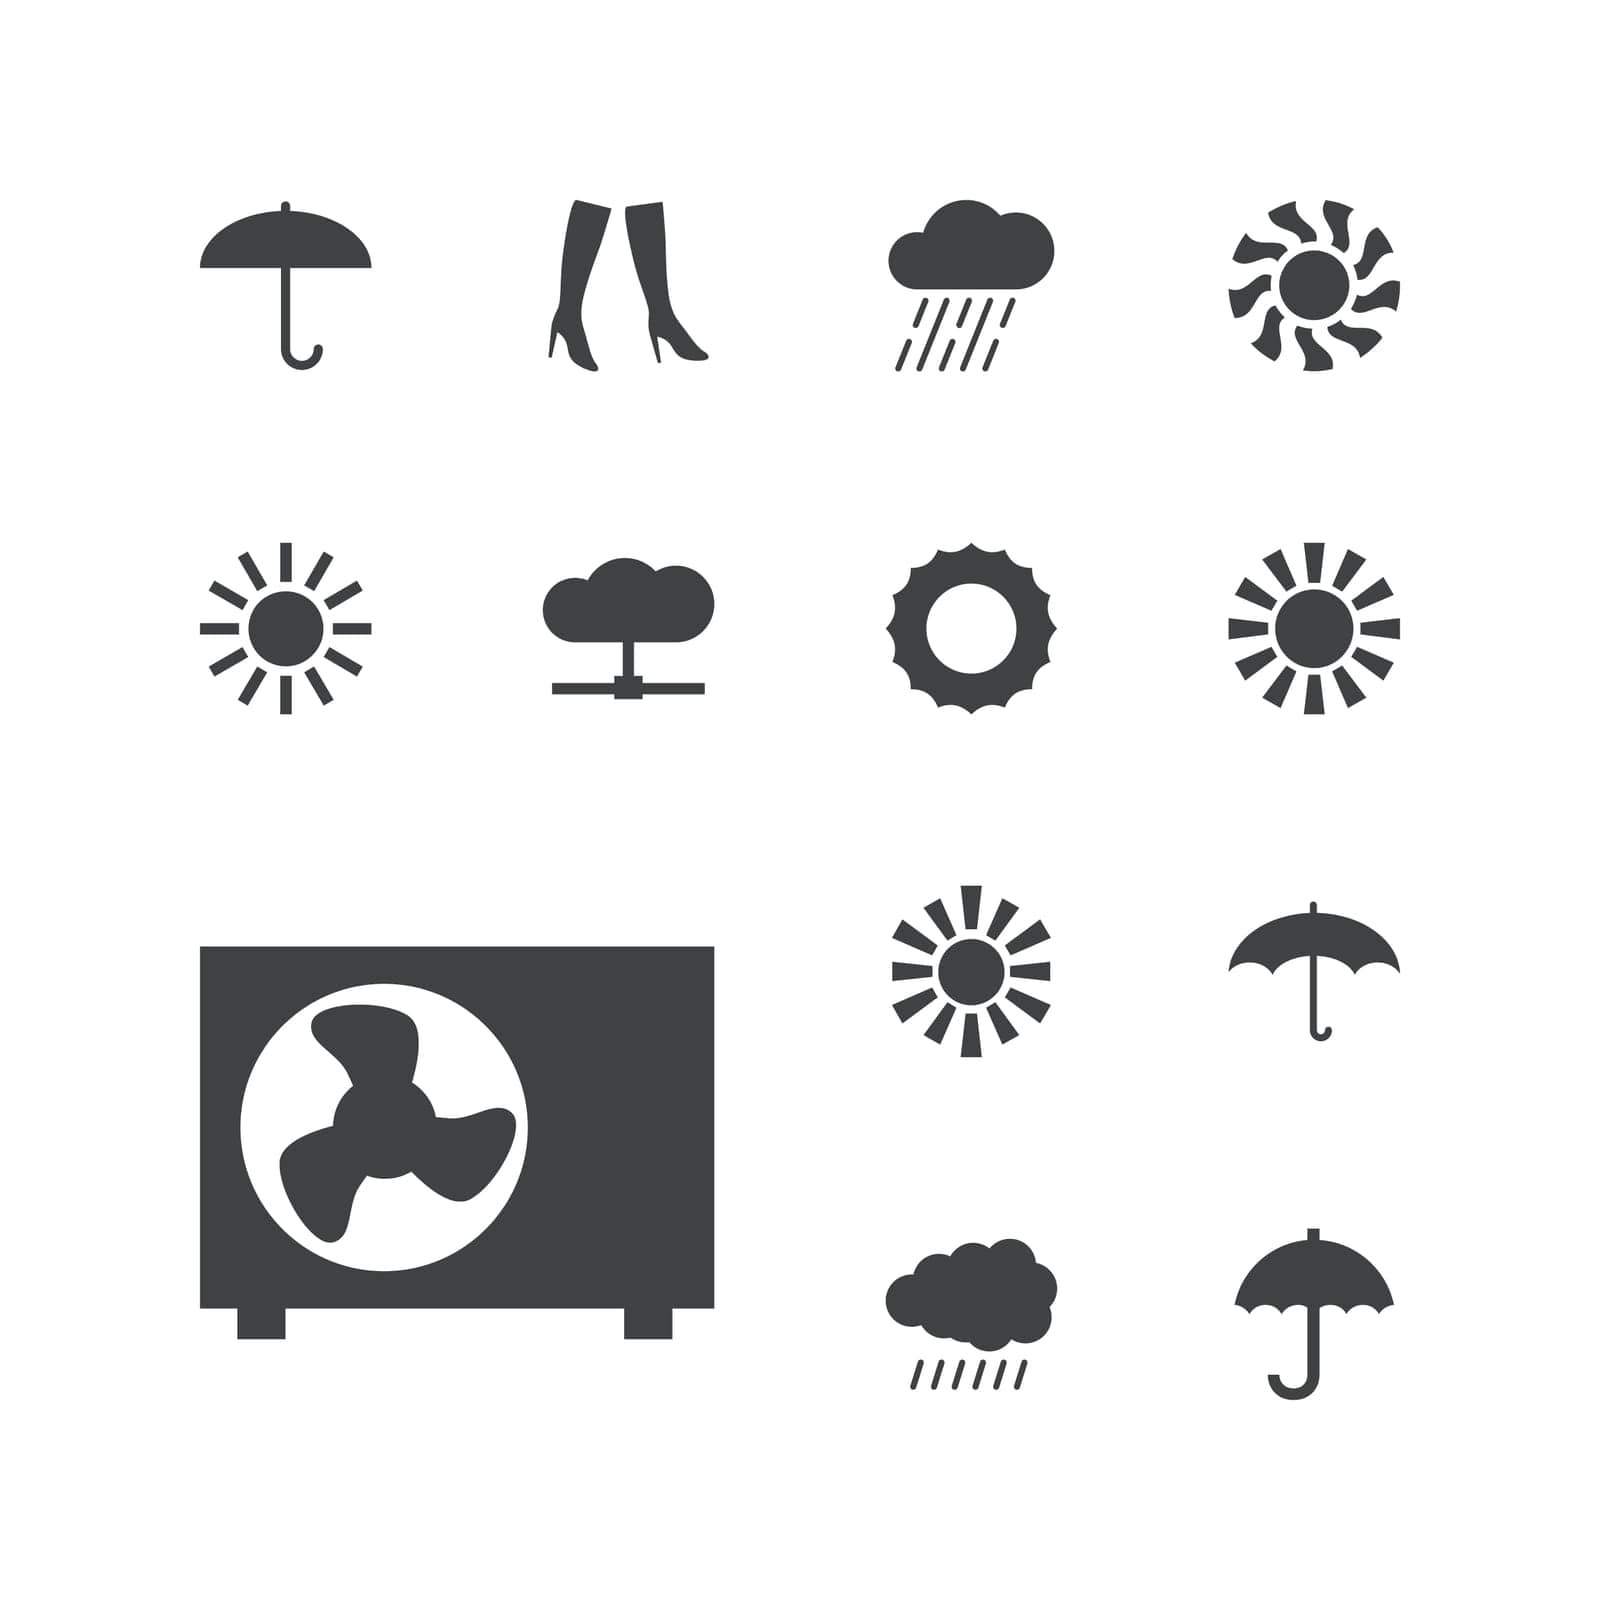 heat,symbol,sunrise,woman,sunshine,happy,icon,sign,bright,isolated,protection,conditioner,air,hot,sun,summer,spring,cloud,white,design,weather,boots,vector,sunny,graphic,element,rain,set,shape,nature,umbrella,black,abstract,climate,warm,sunlight,light,background,sunset,style,illustration,object,fashion by ogqcorp